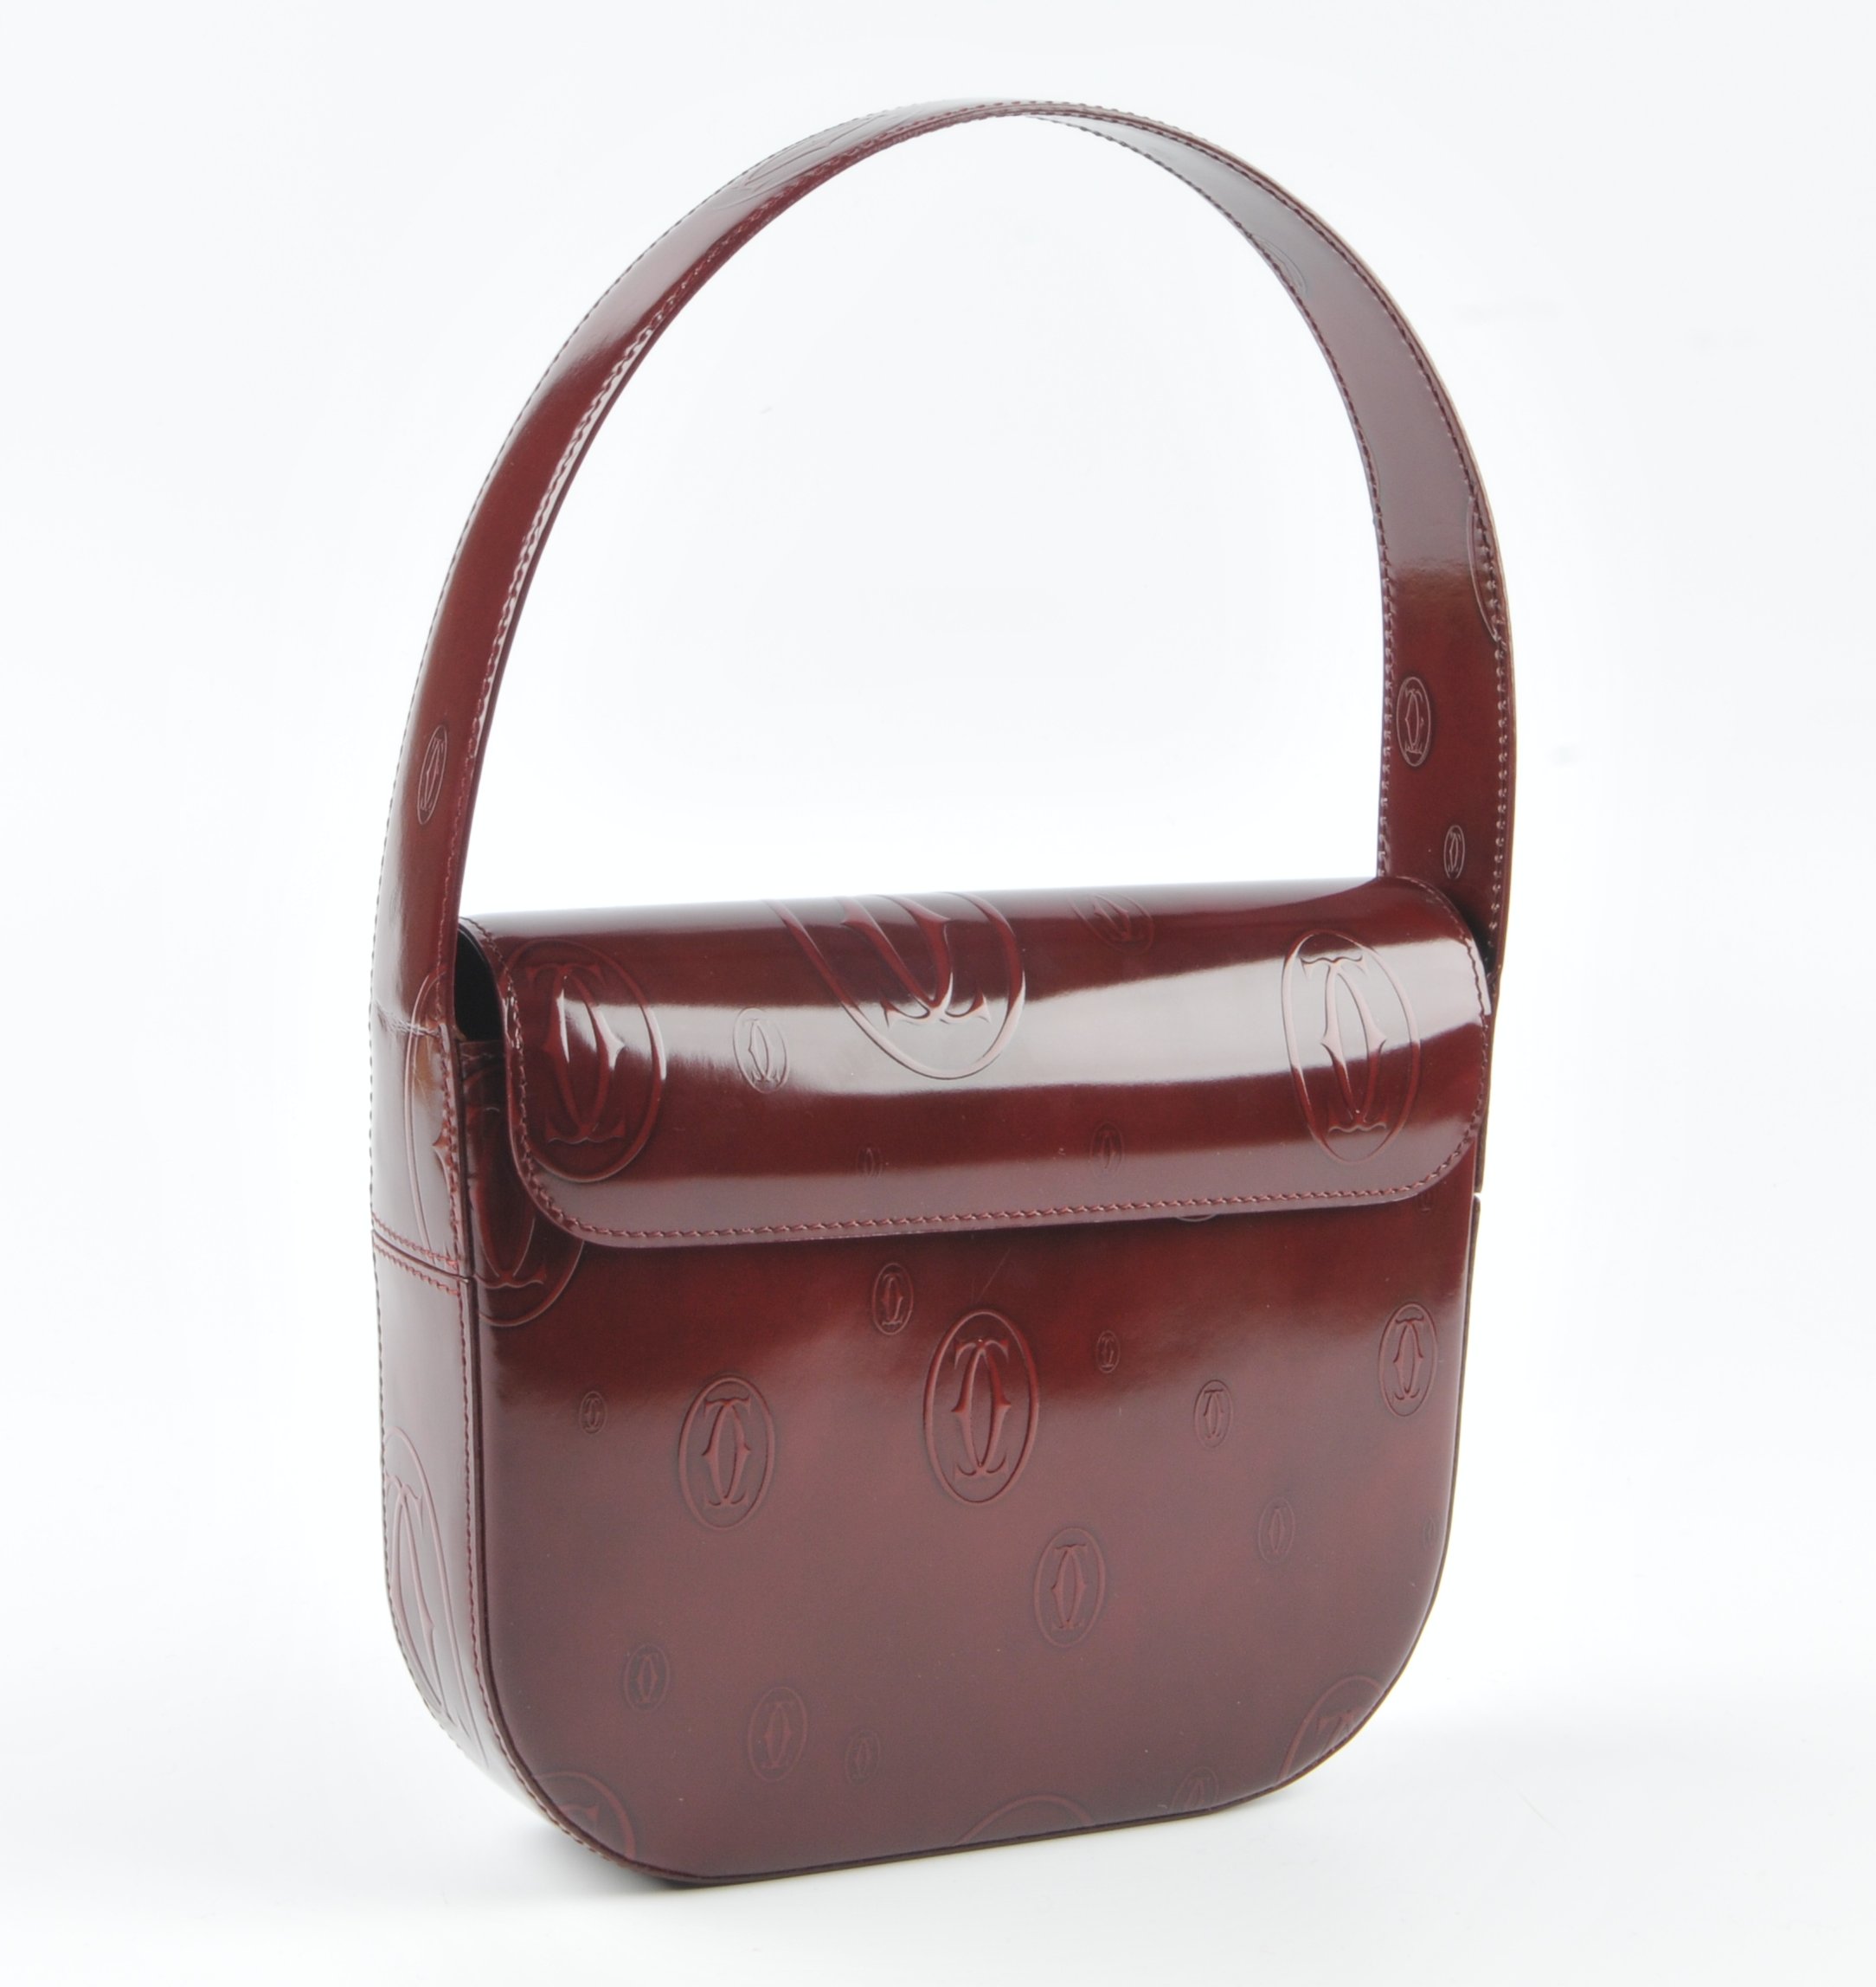 CARTIER - a Happy Birthday Bordeaux handbag. Designed with a structured shape, burgundy monogram - Image 2 of 5